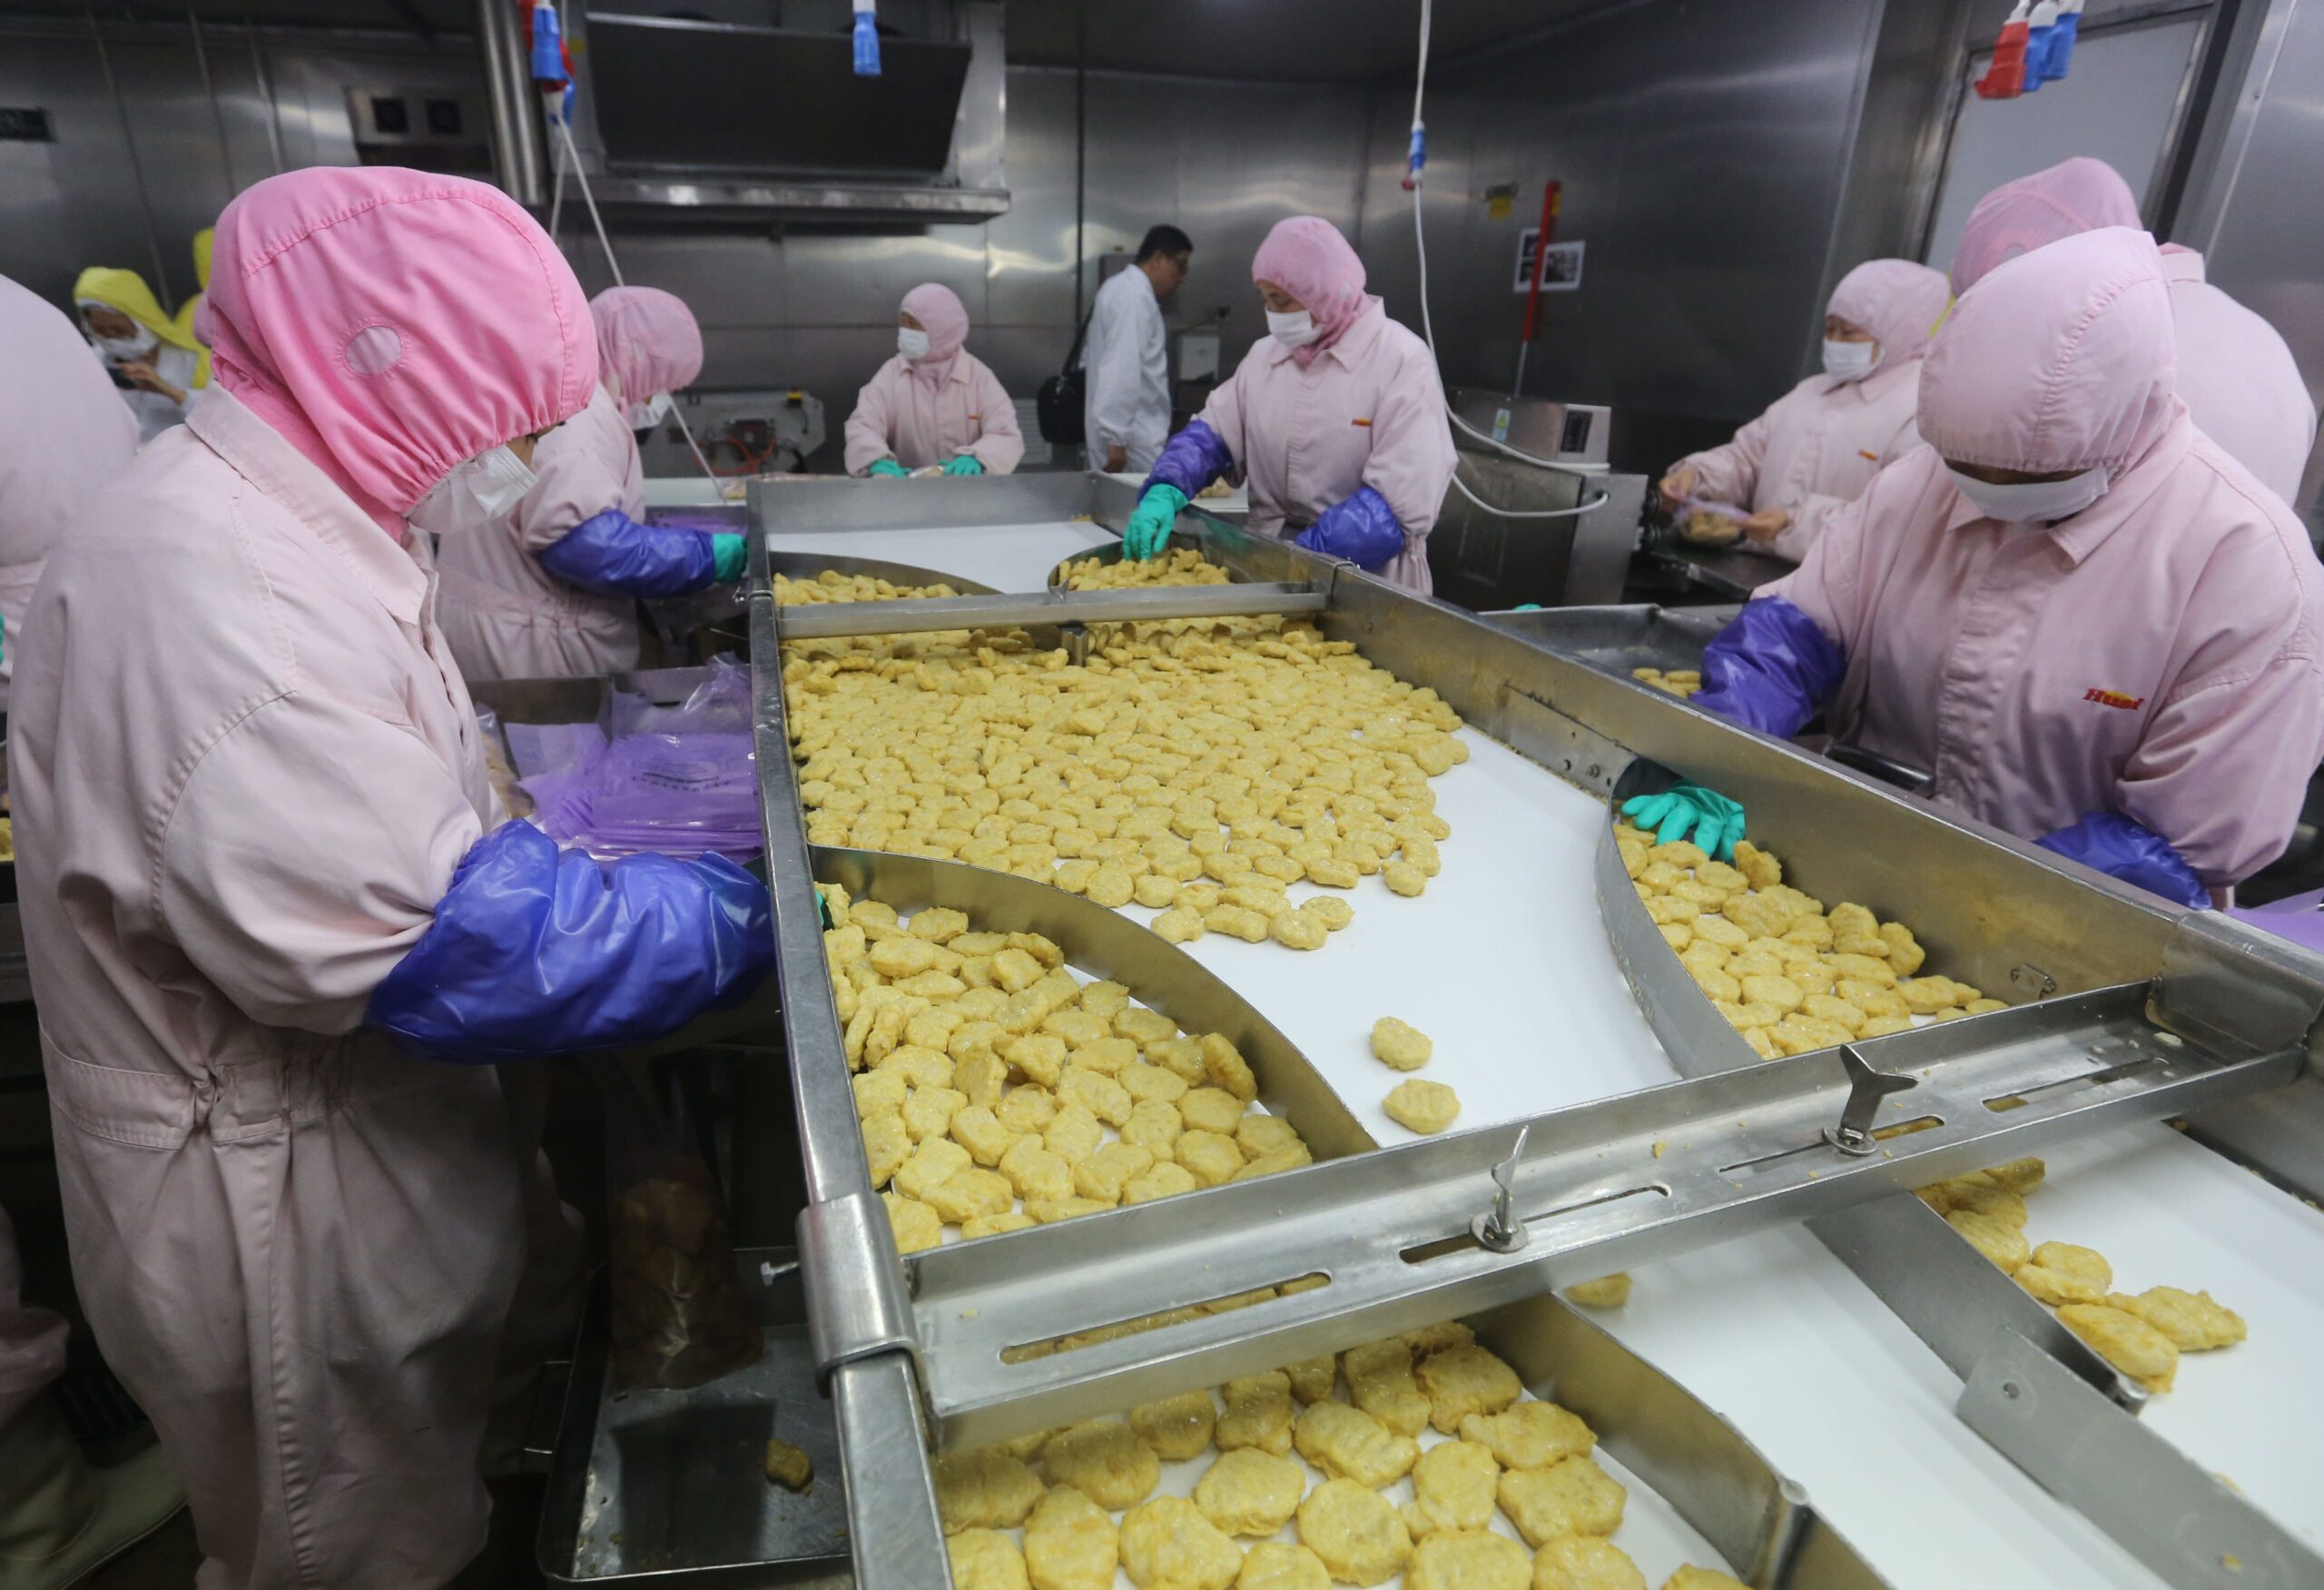 China Culinary Scene: Food Safety and Lawsuits